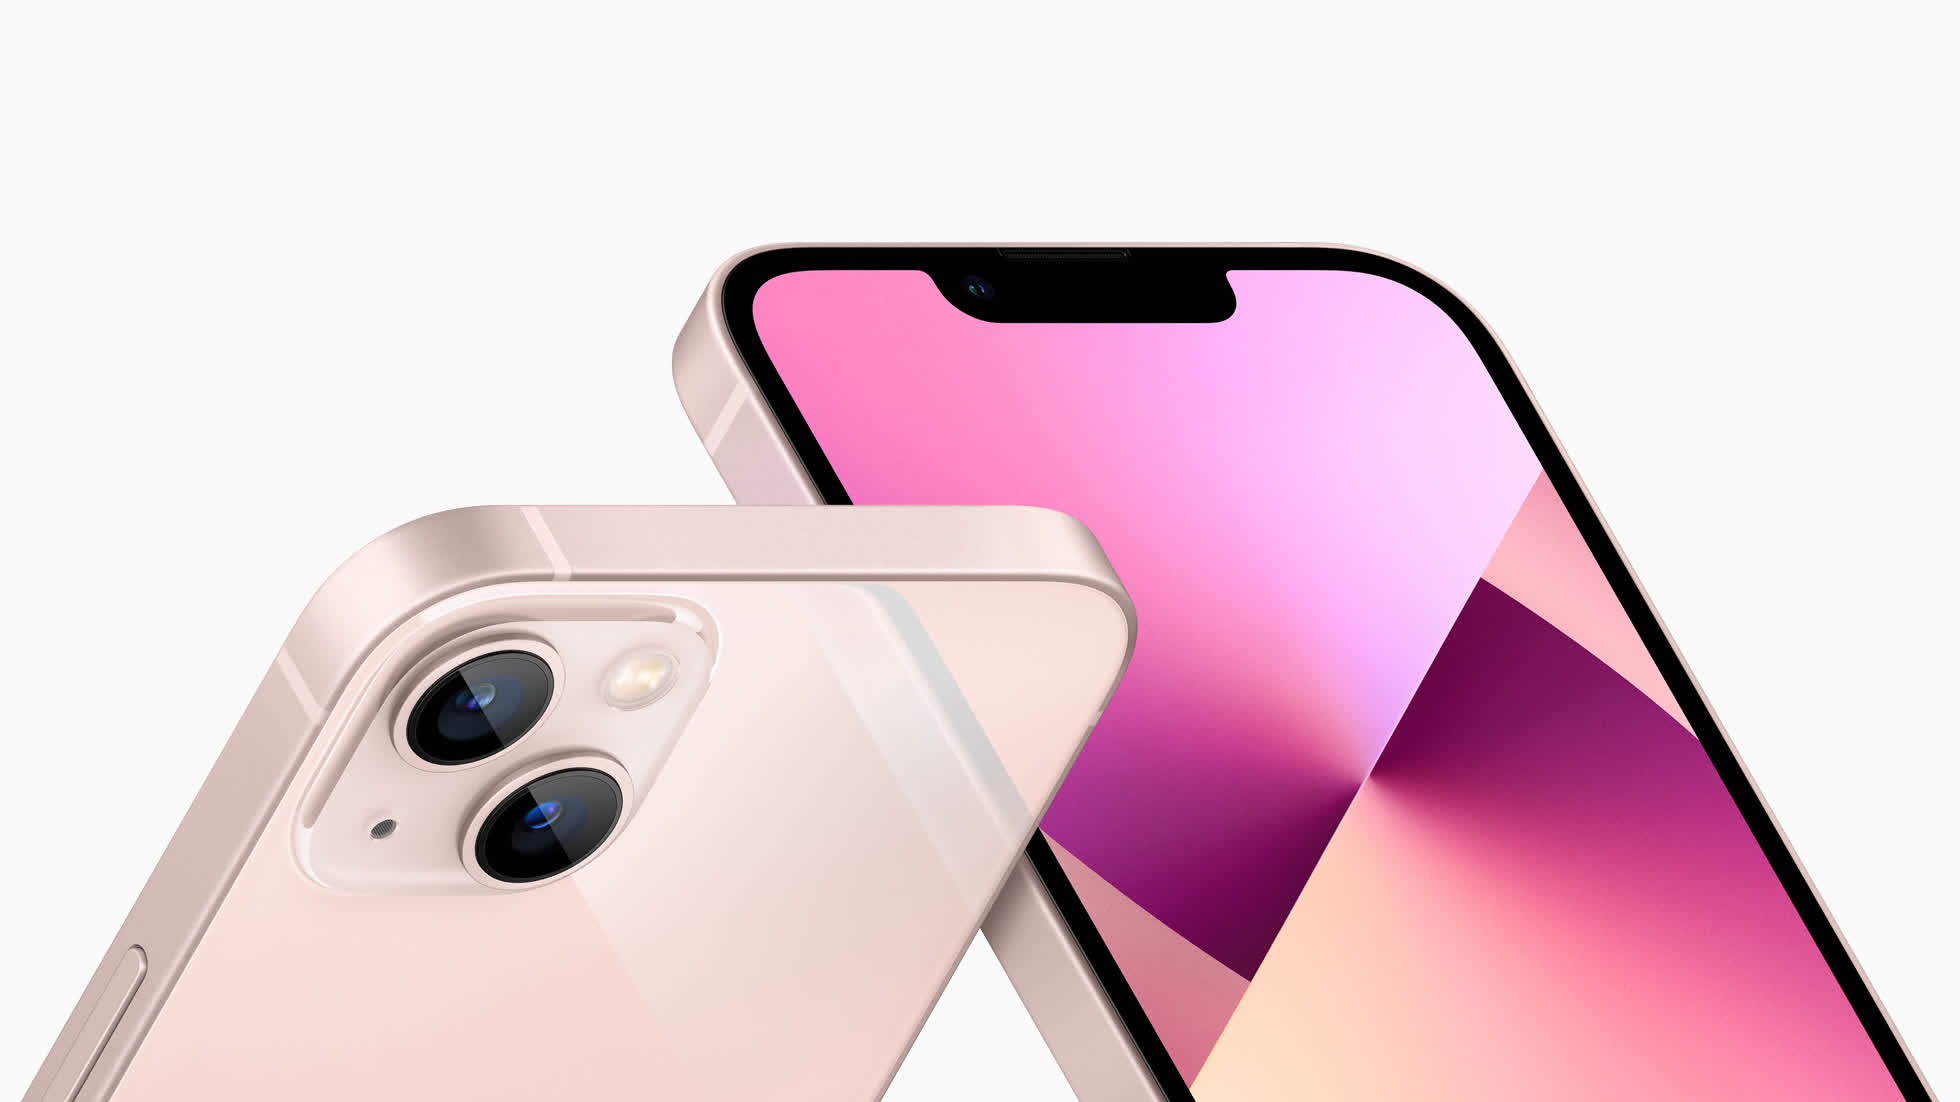 Apple rumored plans point to multiple iPhone 14, Apple Watch, and M2 Mac models for 2022 and 2023